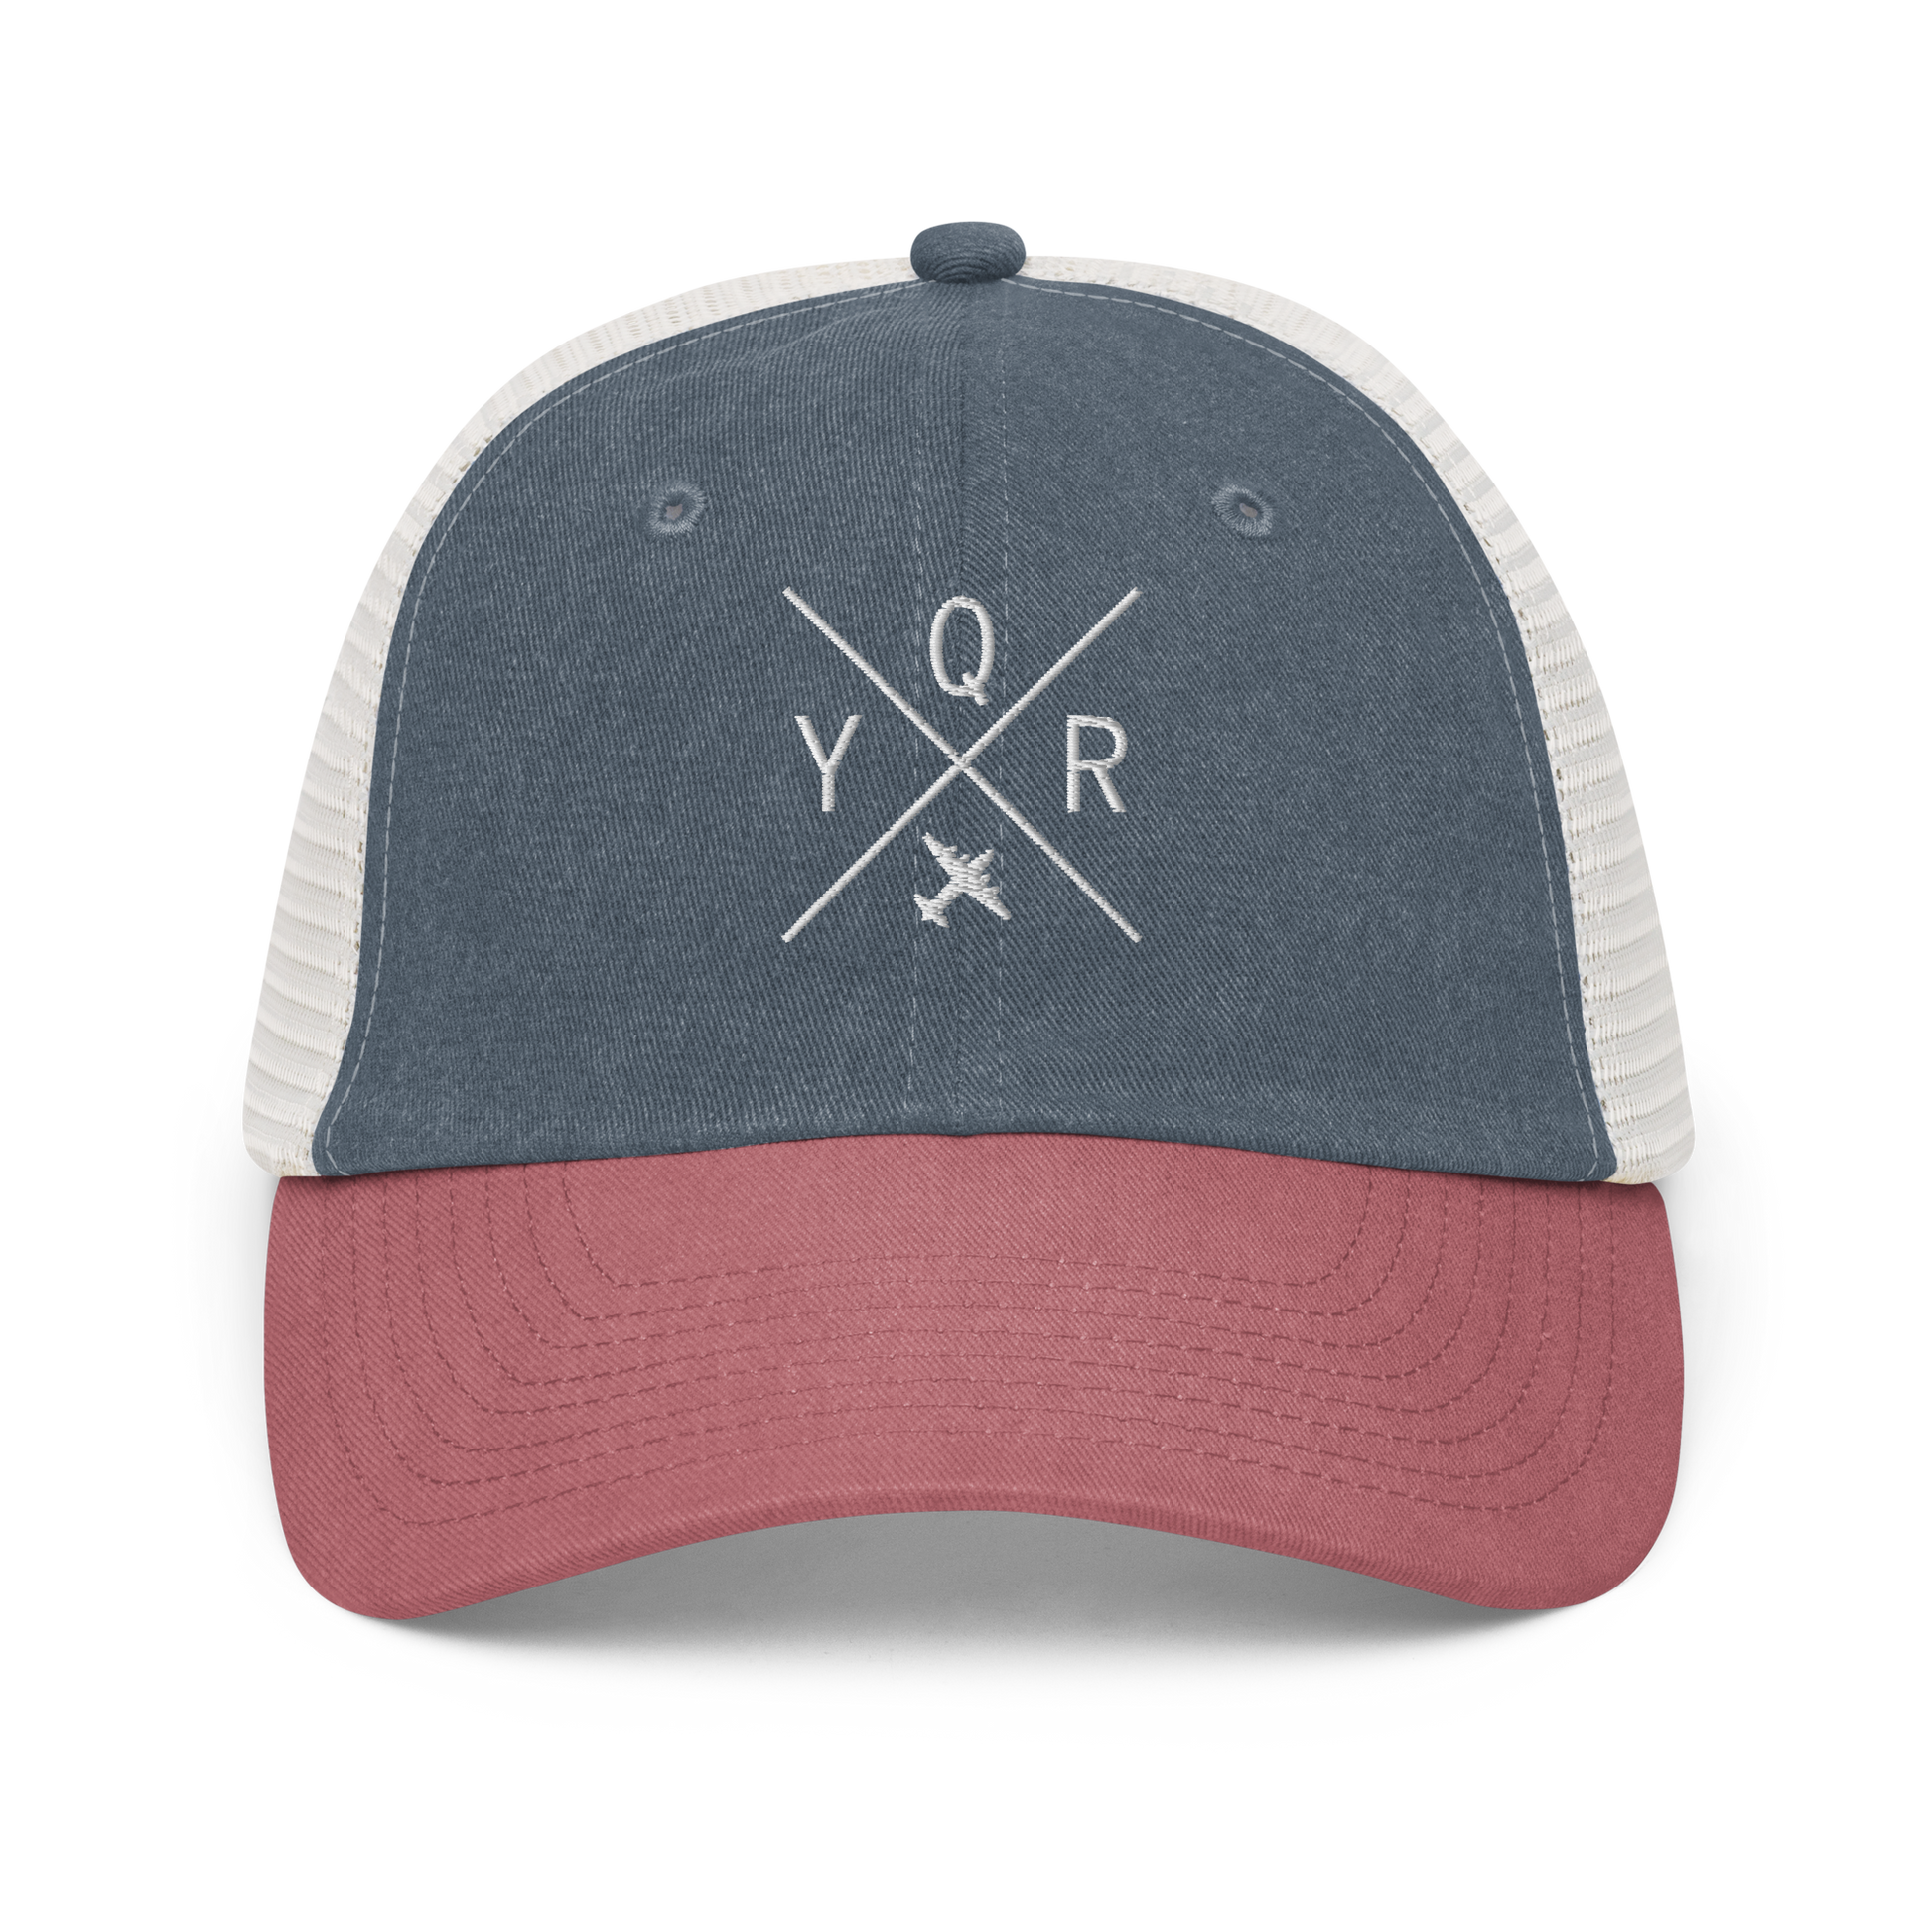 YHM Designs - YQR Regina Pigment-Dyed Trucker Cap - Crossed-X Design with Airport Code and Vintage Propliner - White Embroidery - Image 12